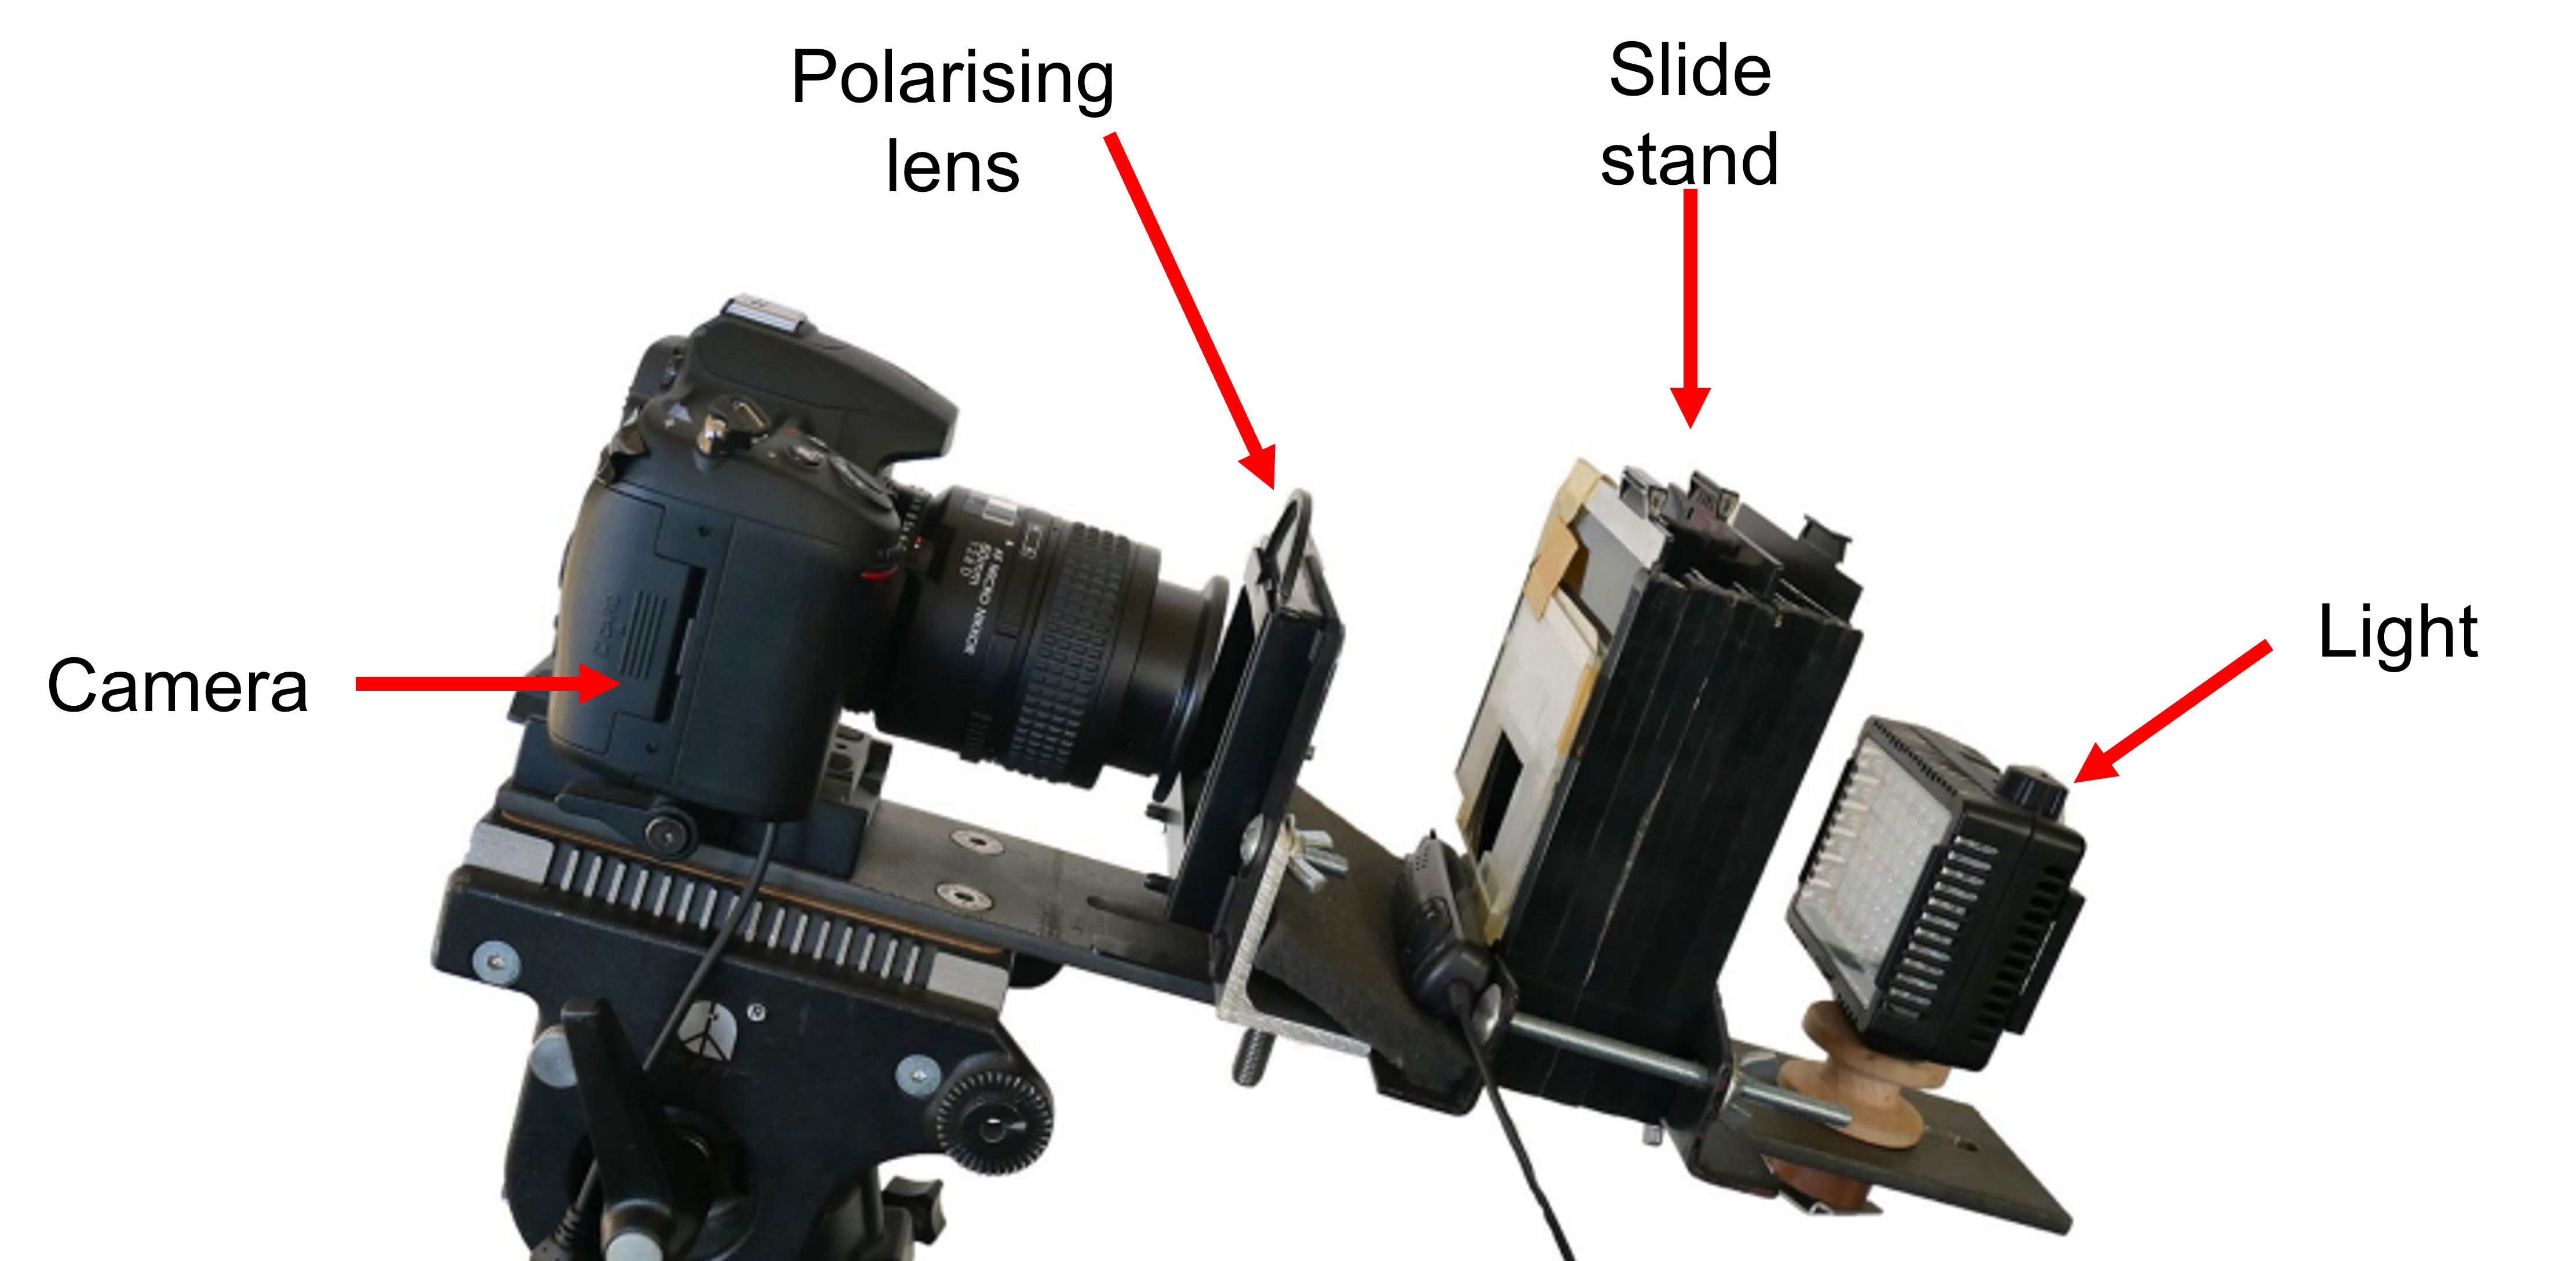 shows the set-up of the camera, including polarising lense and slide stand